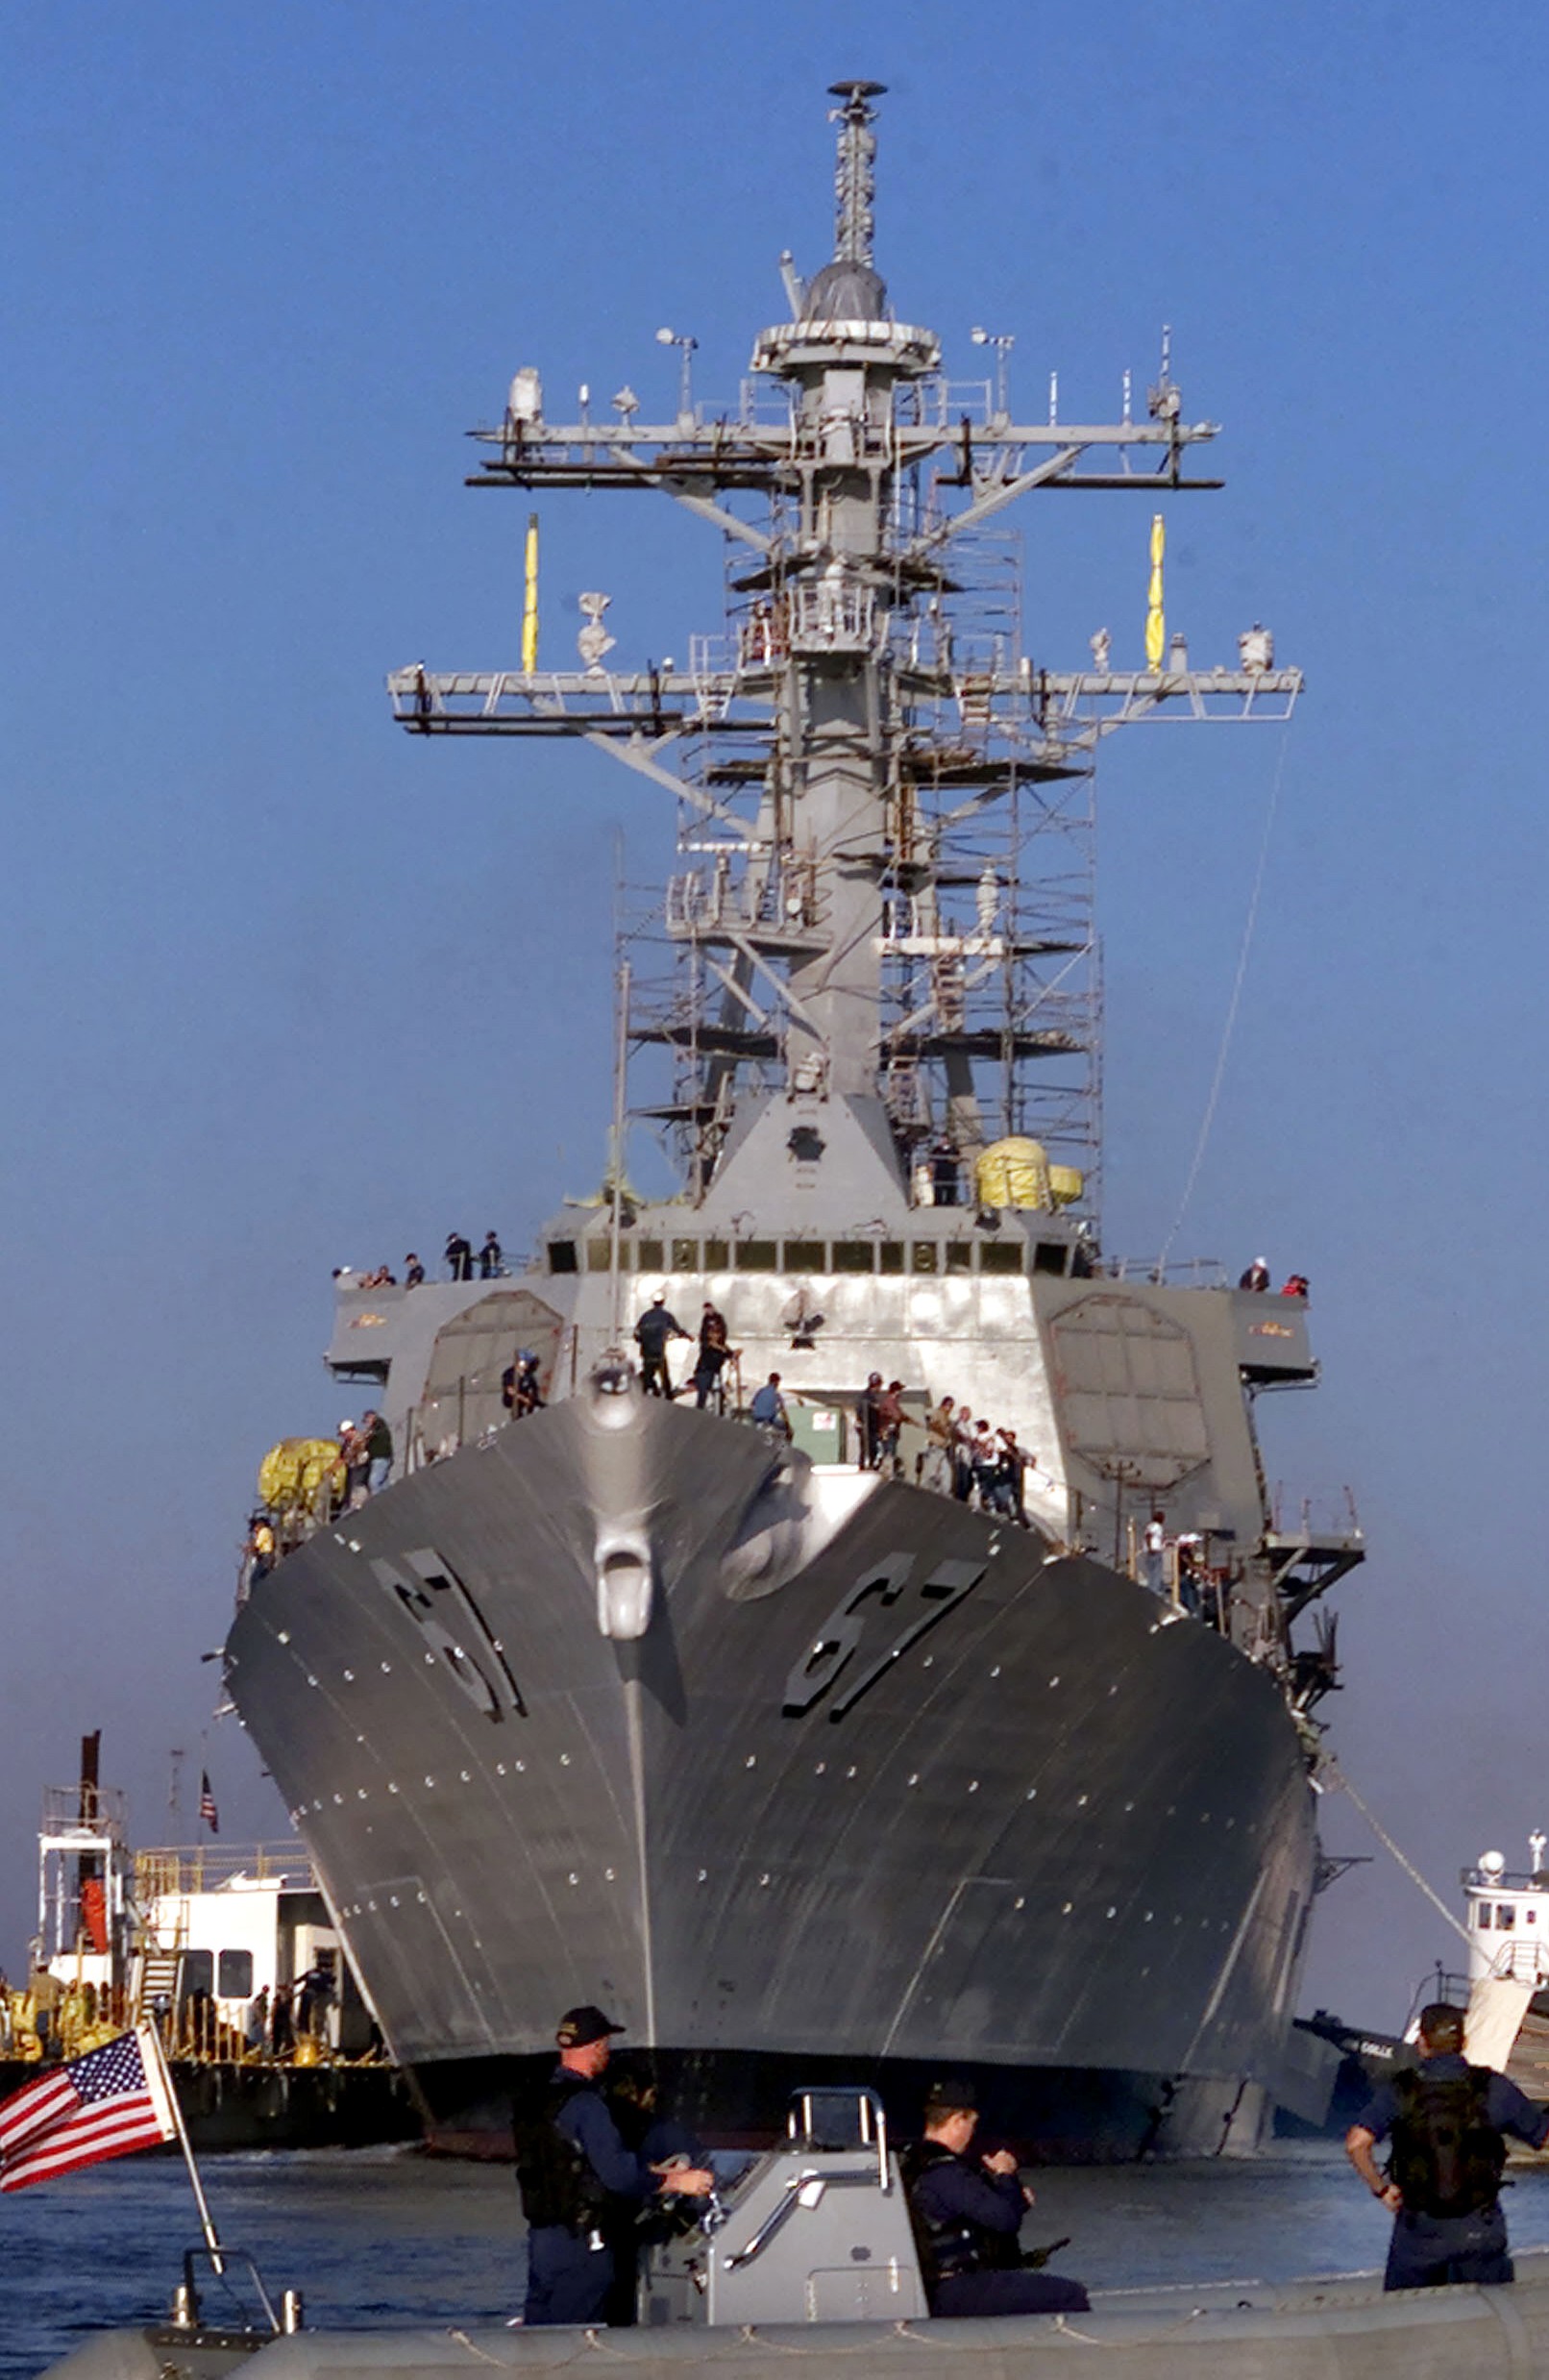 ddg-67 uss cole guided missile destroyer arleigh burke class navy aegis 51